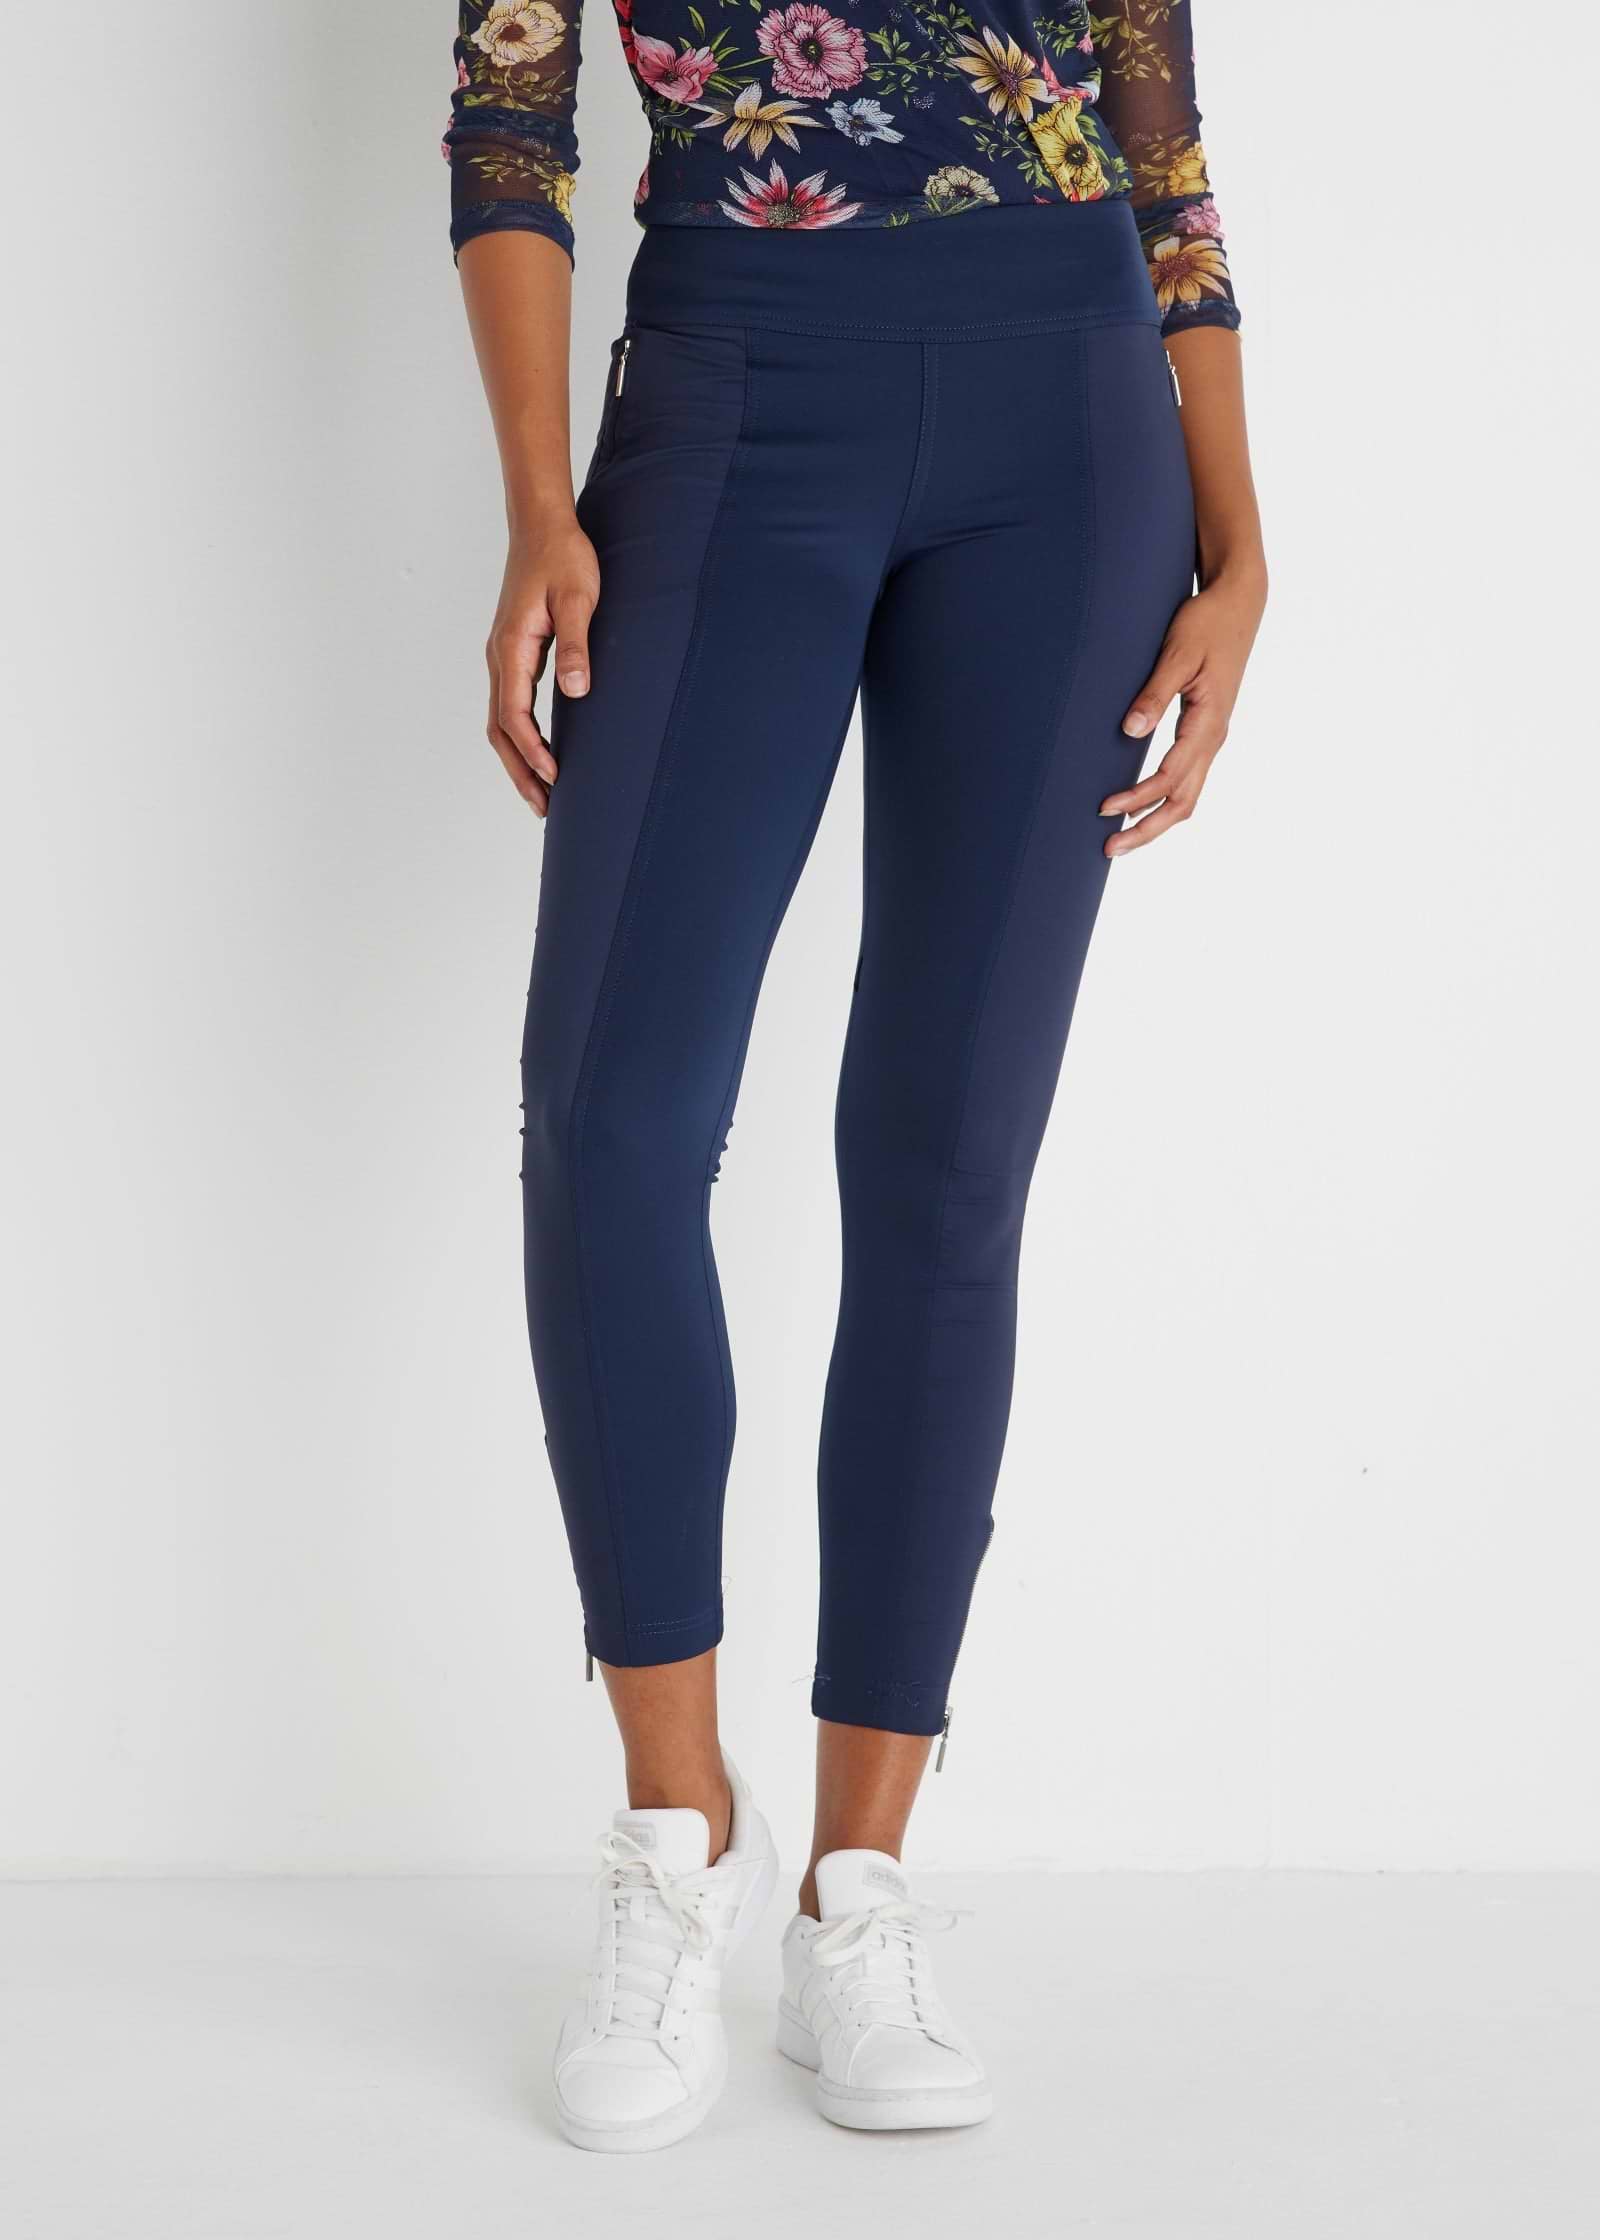 The Best Travel Pants. Front Profile of the Allie Pant in Navy